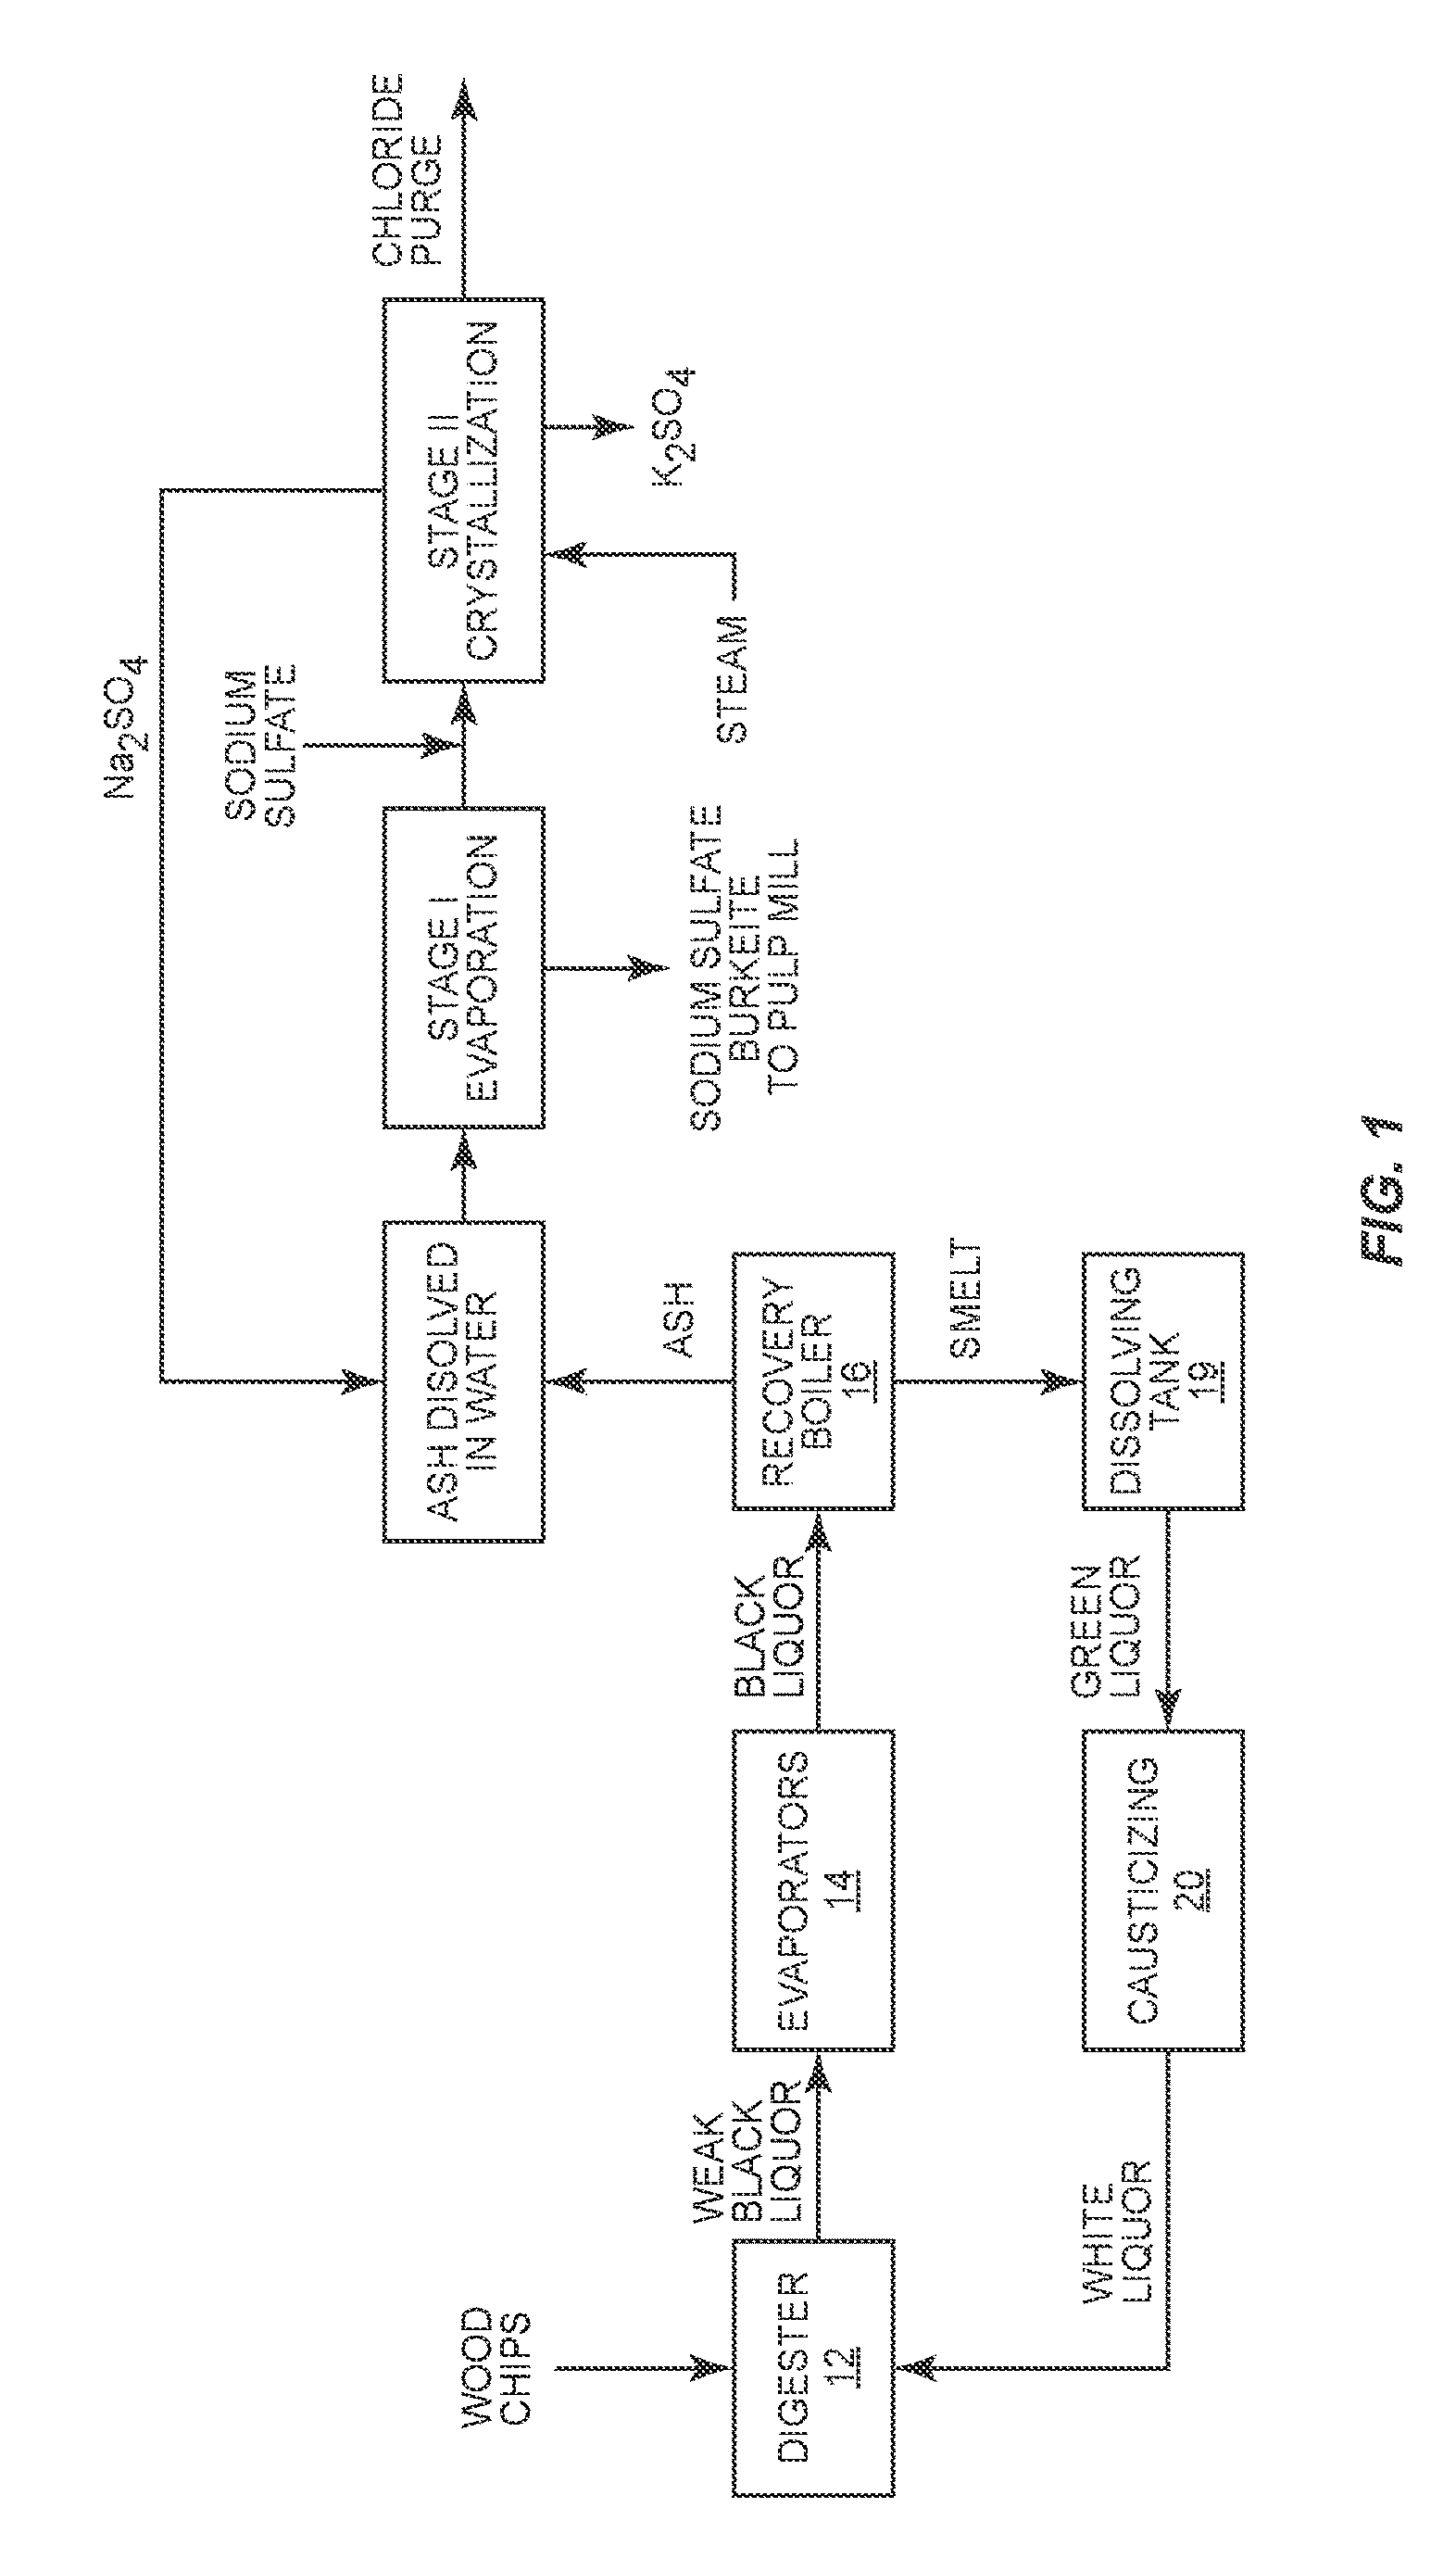 Method of recovering pulping chemicals from dissolved ash having a high carbonate content